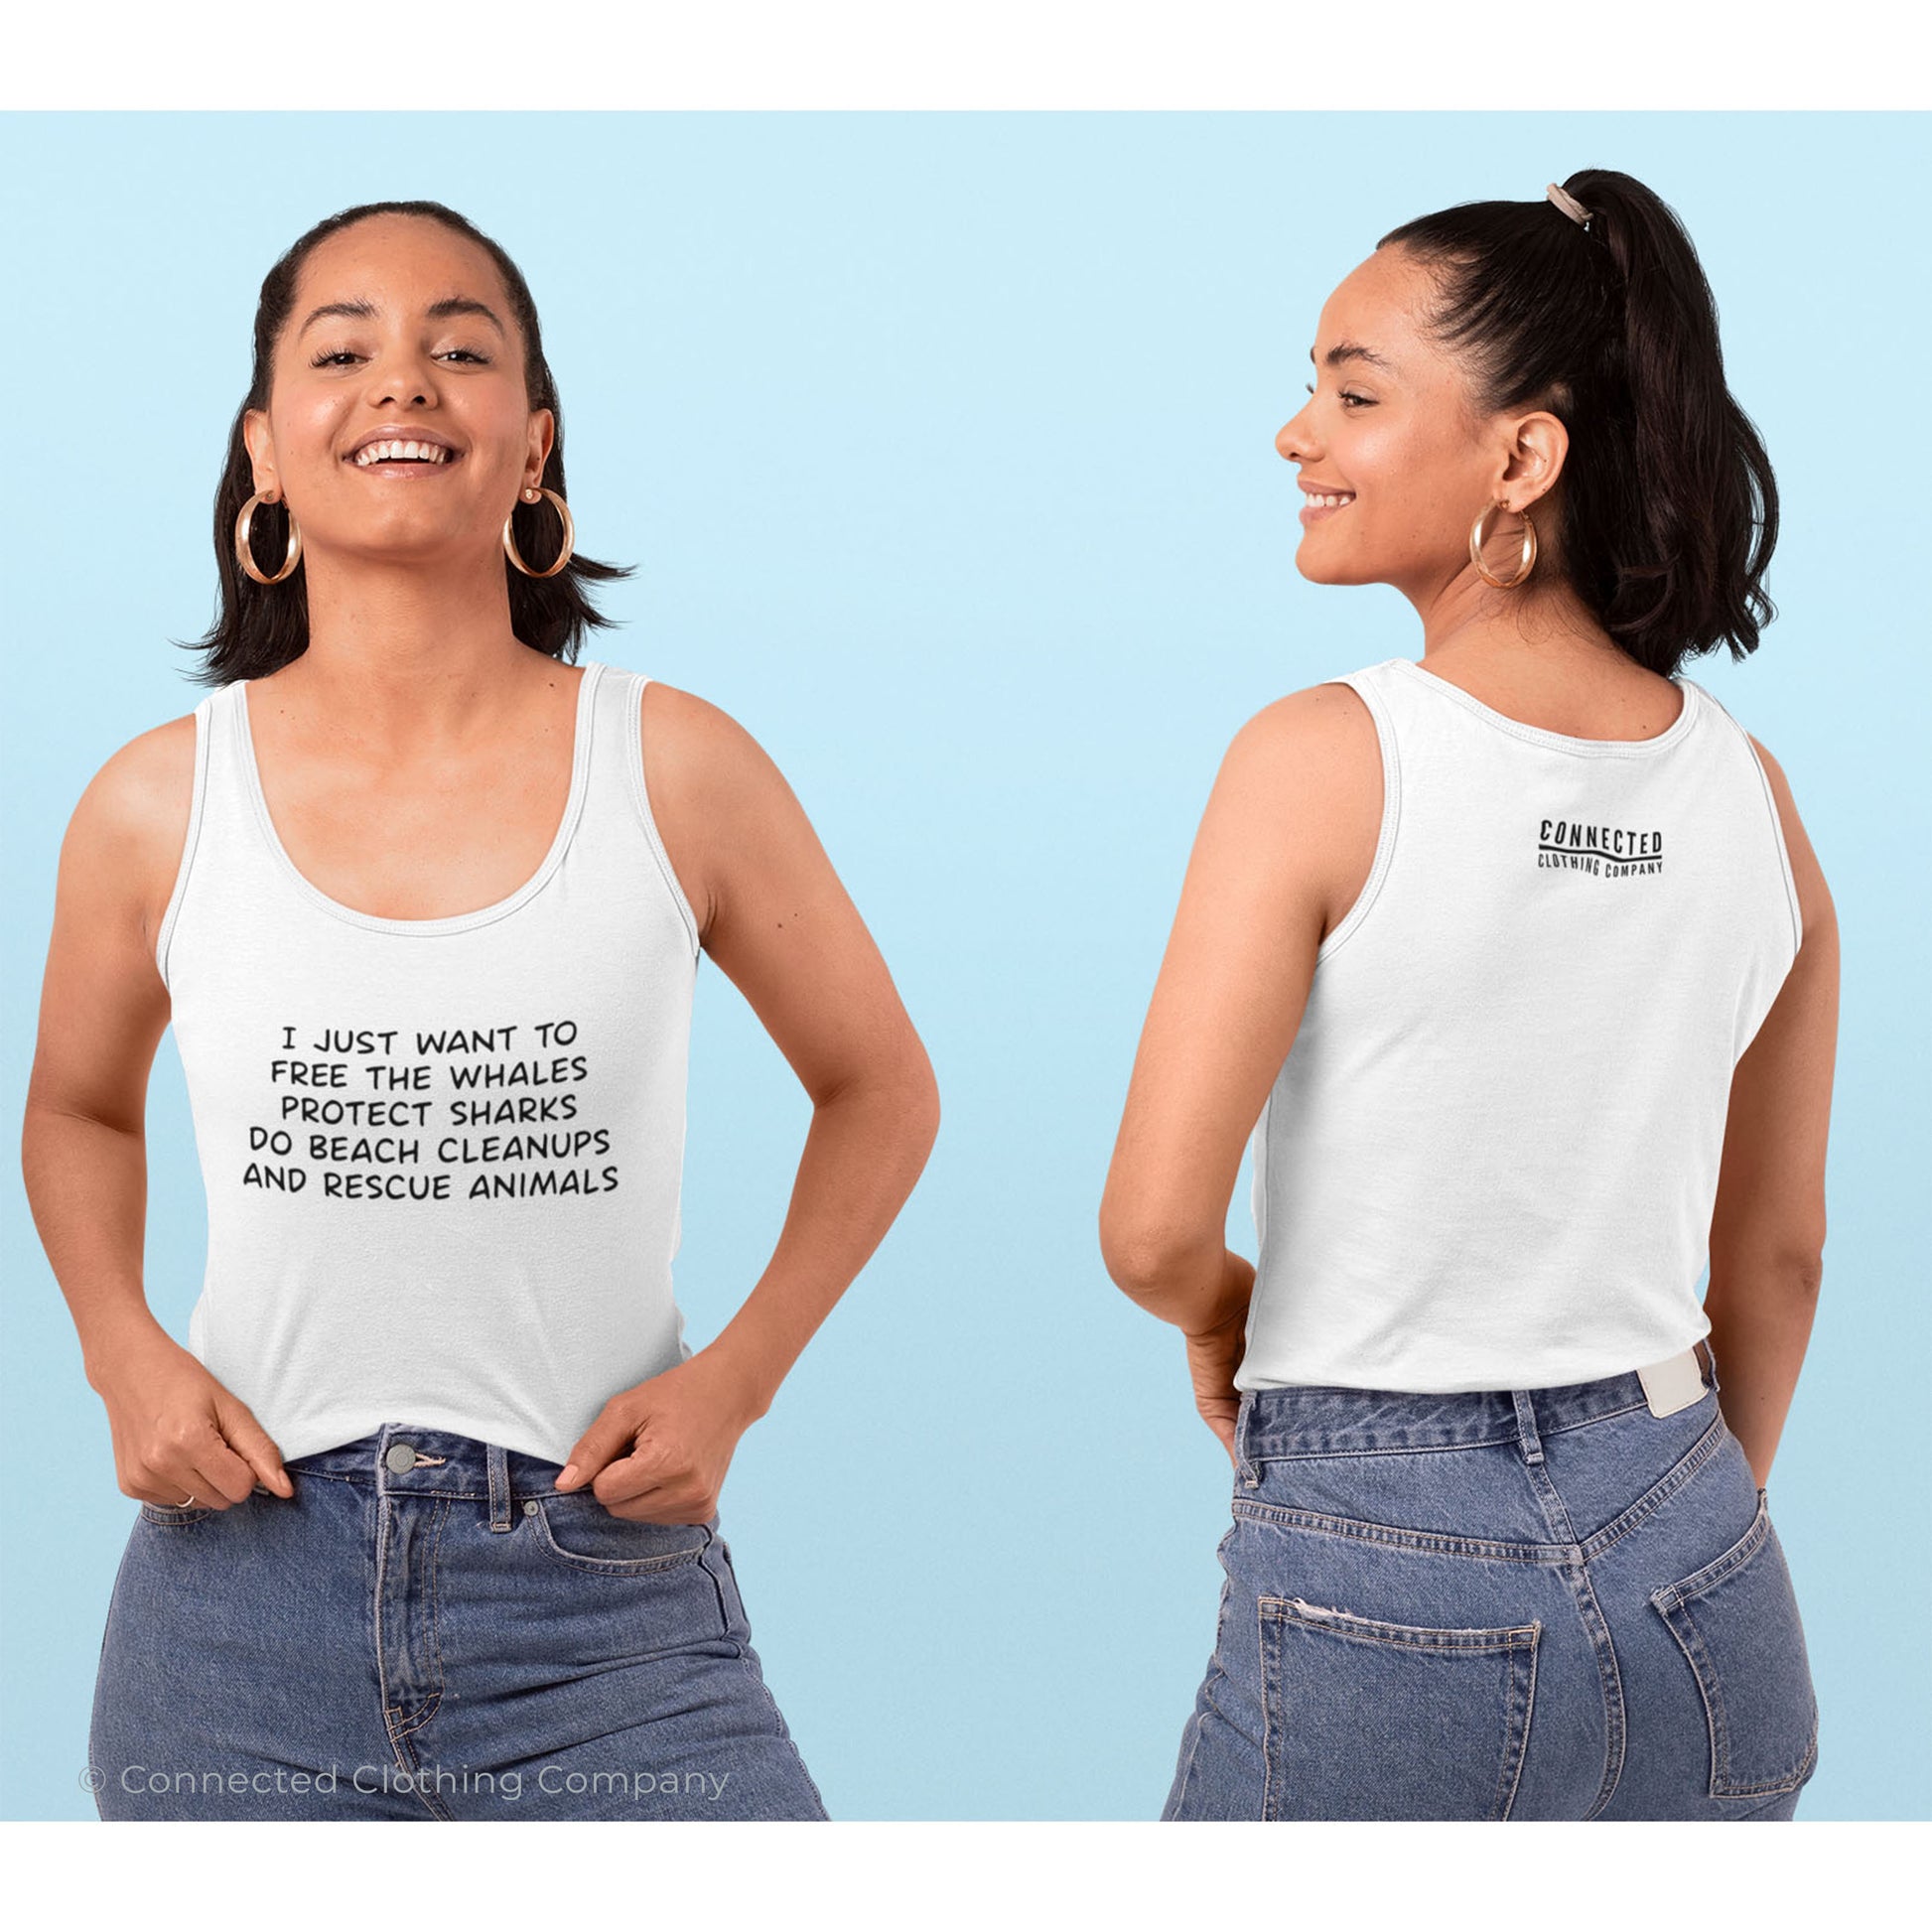 Model Wearing White I Just Want To Save The World Tank Top reads "I just want to free the whales, protect sharks, do beach cleanups, and rescue animals." - sweetsherriloudesigns - Ethically and Sustainably Made - 10% donated to Mission Blue ocean conservation